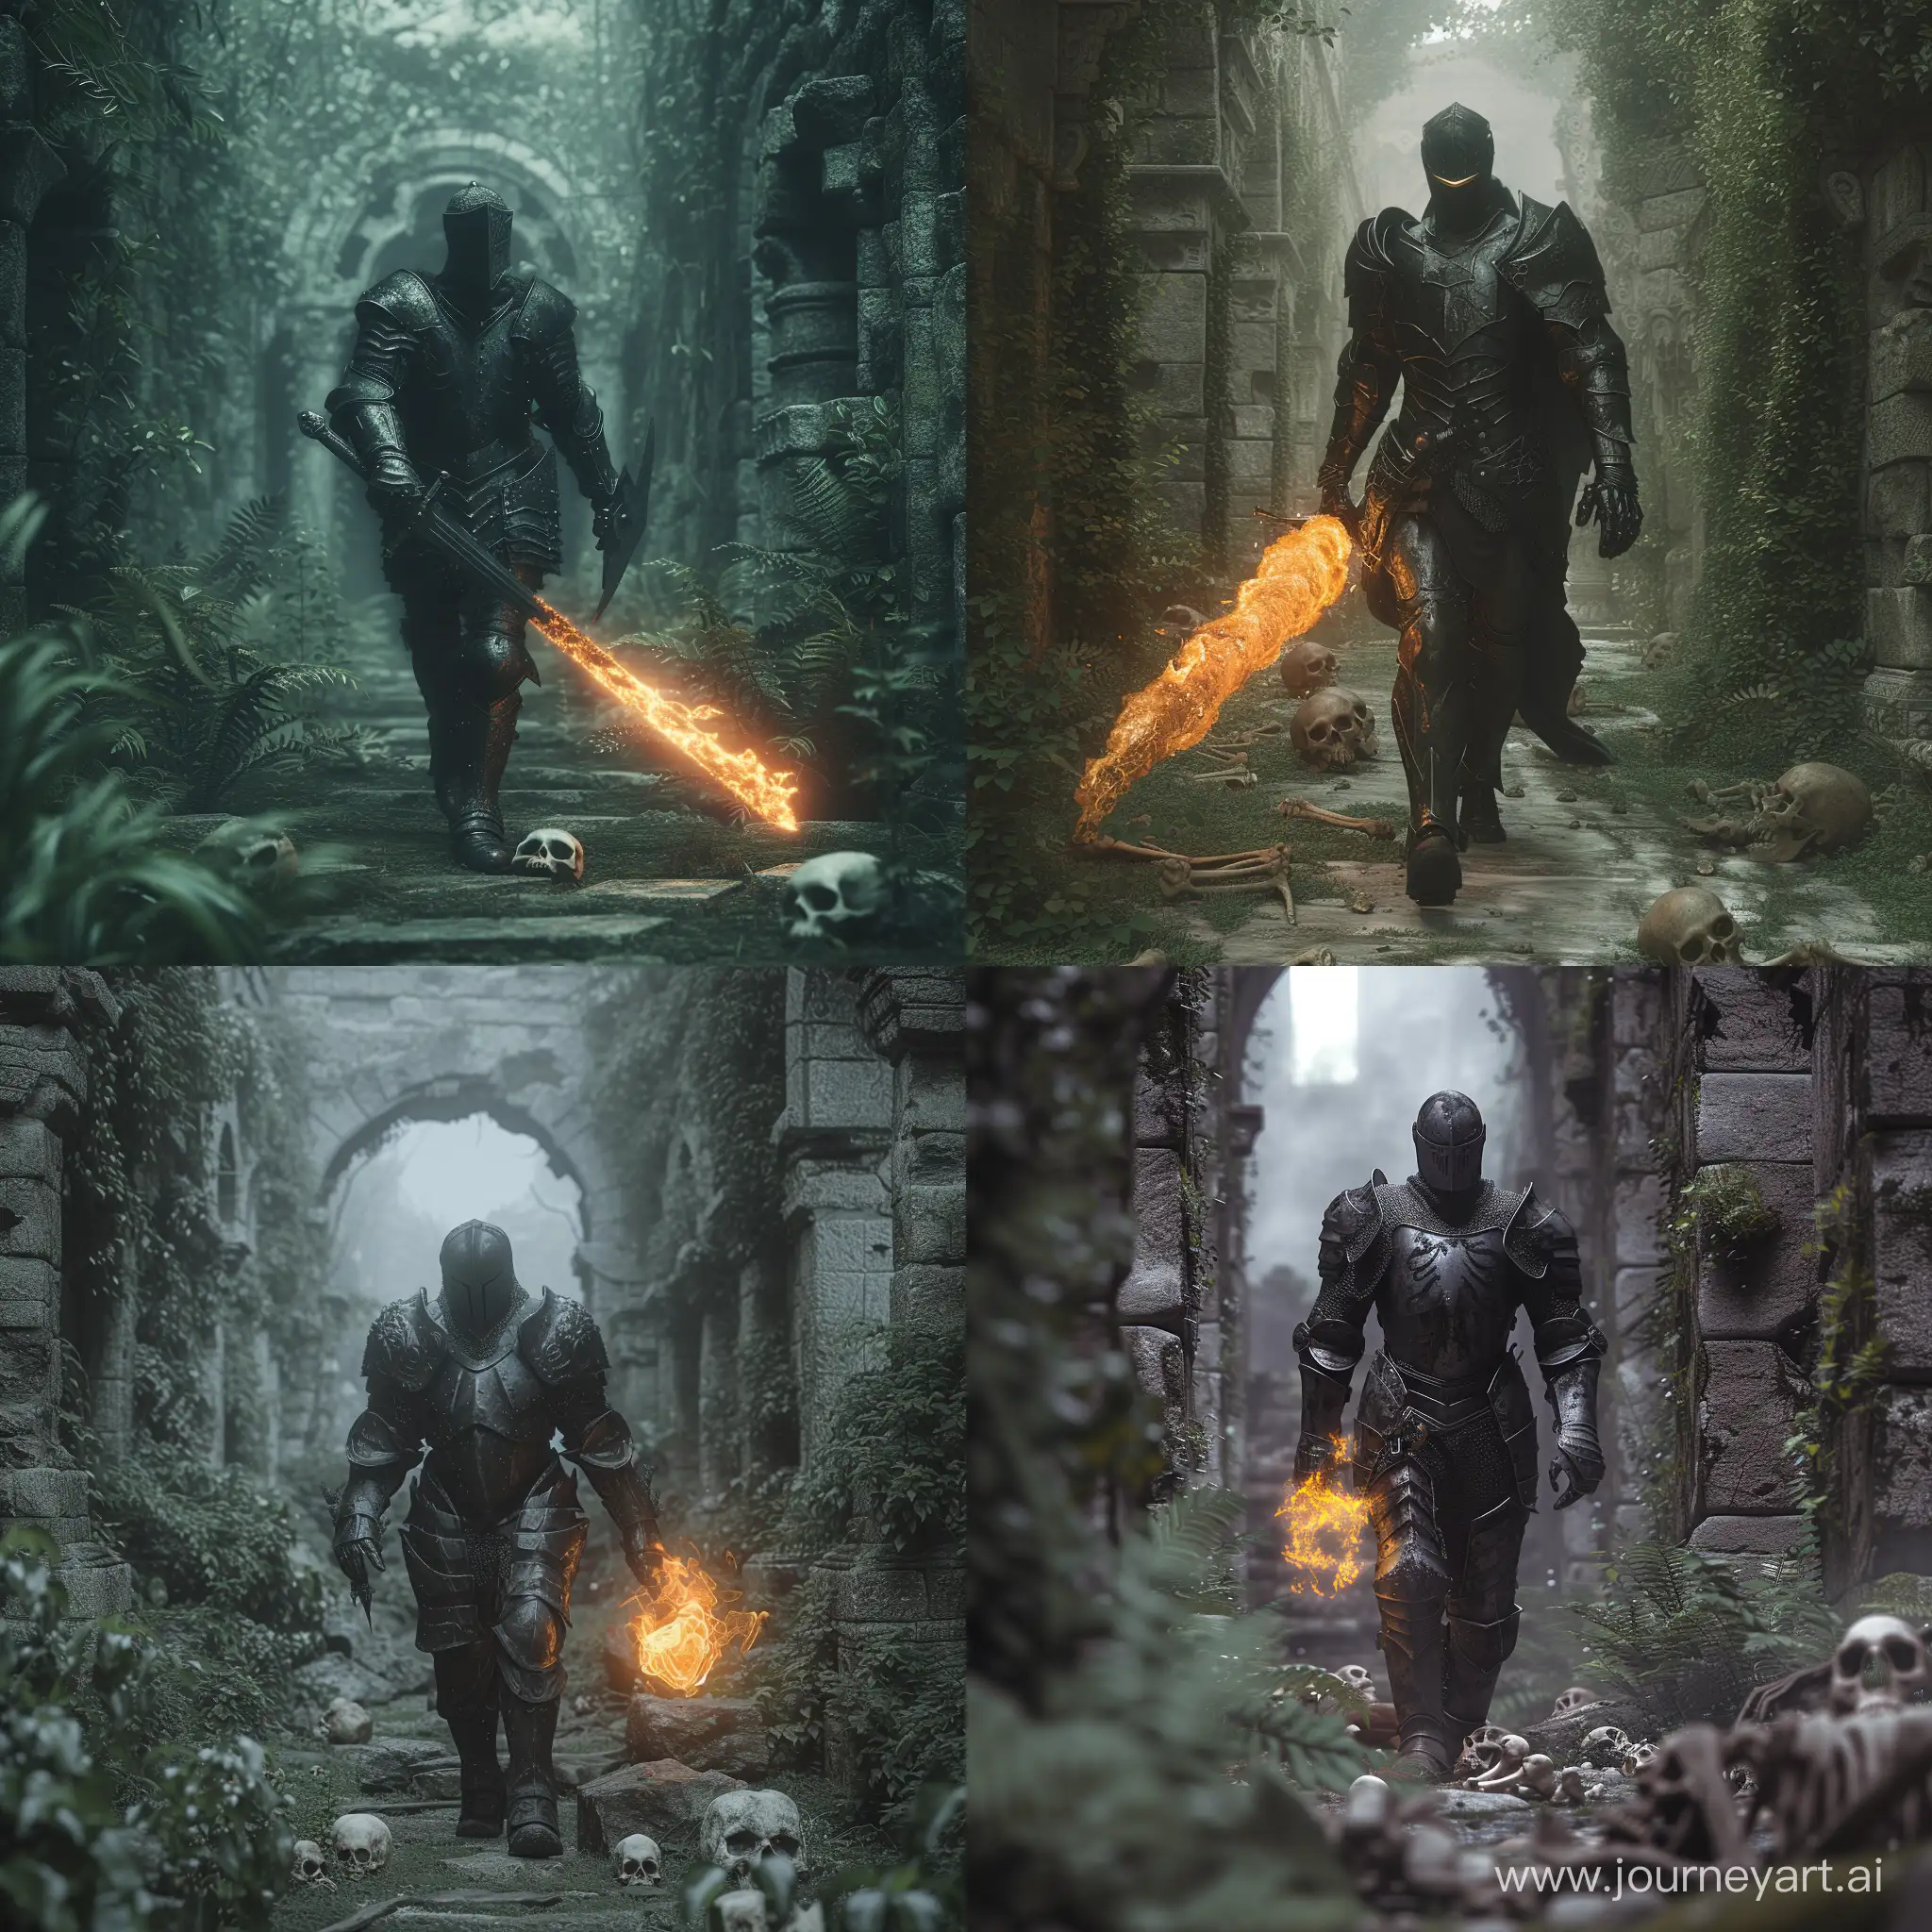 Mysterious-Titanium-Knight-with-Flaming-Sword-in-Ancient-Stone-Corridor